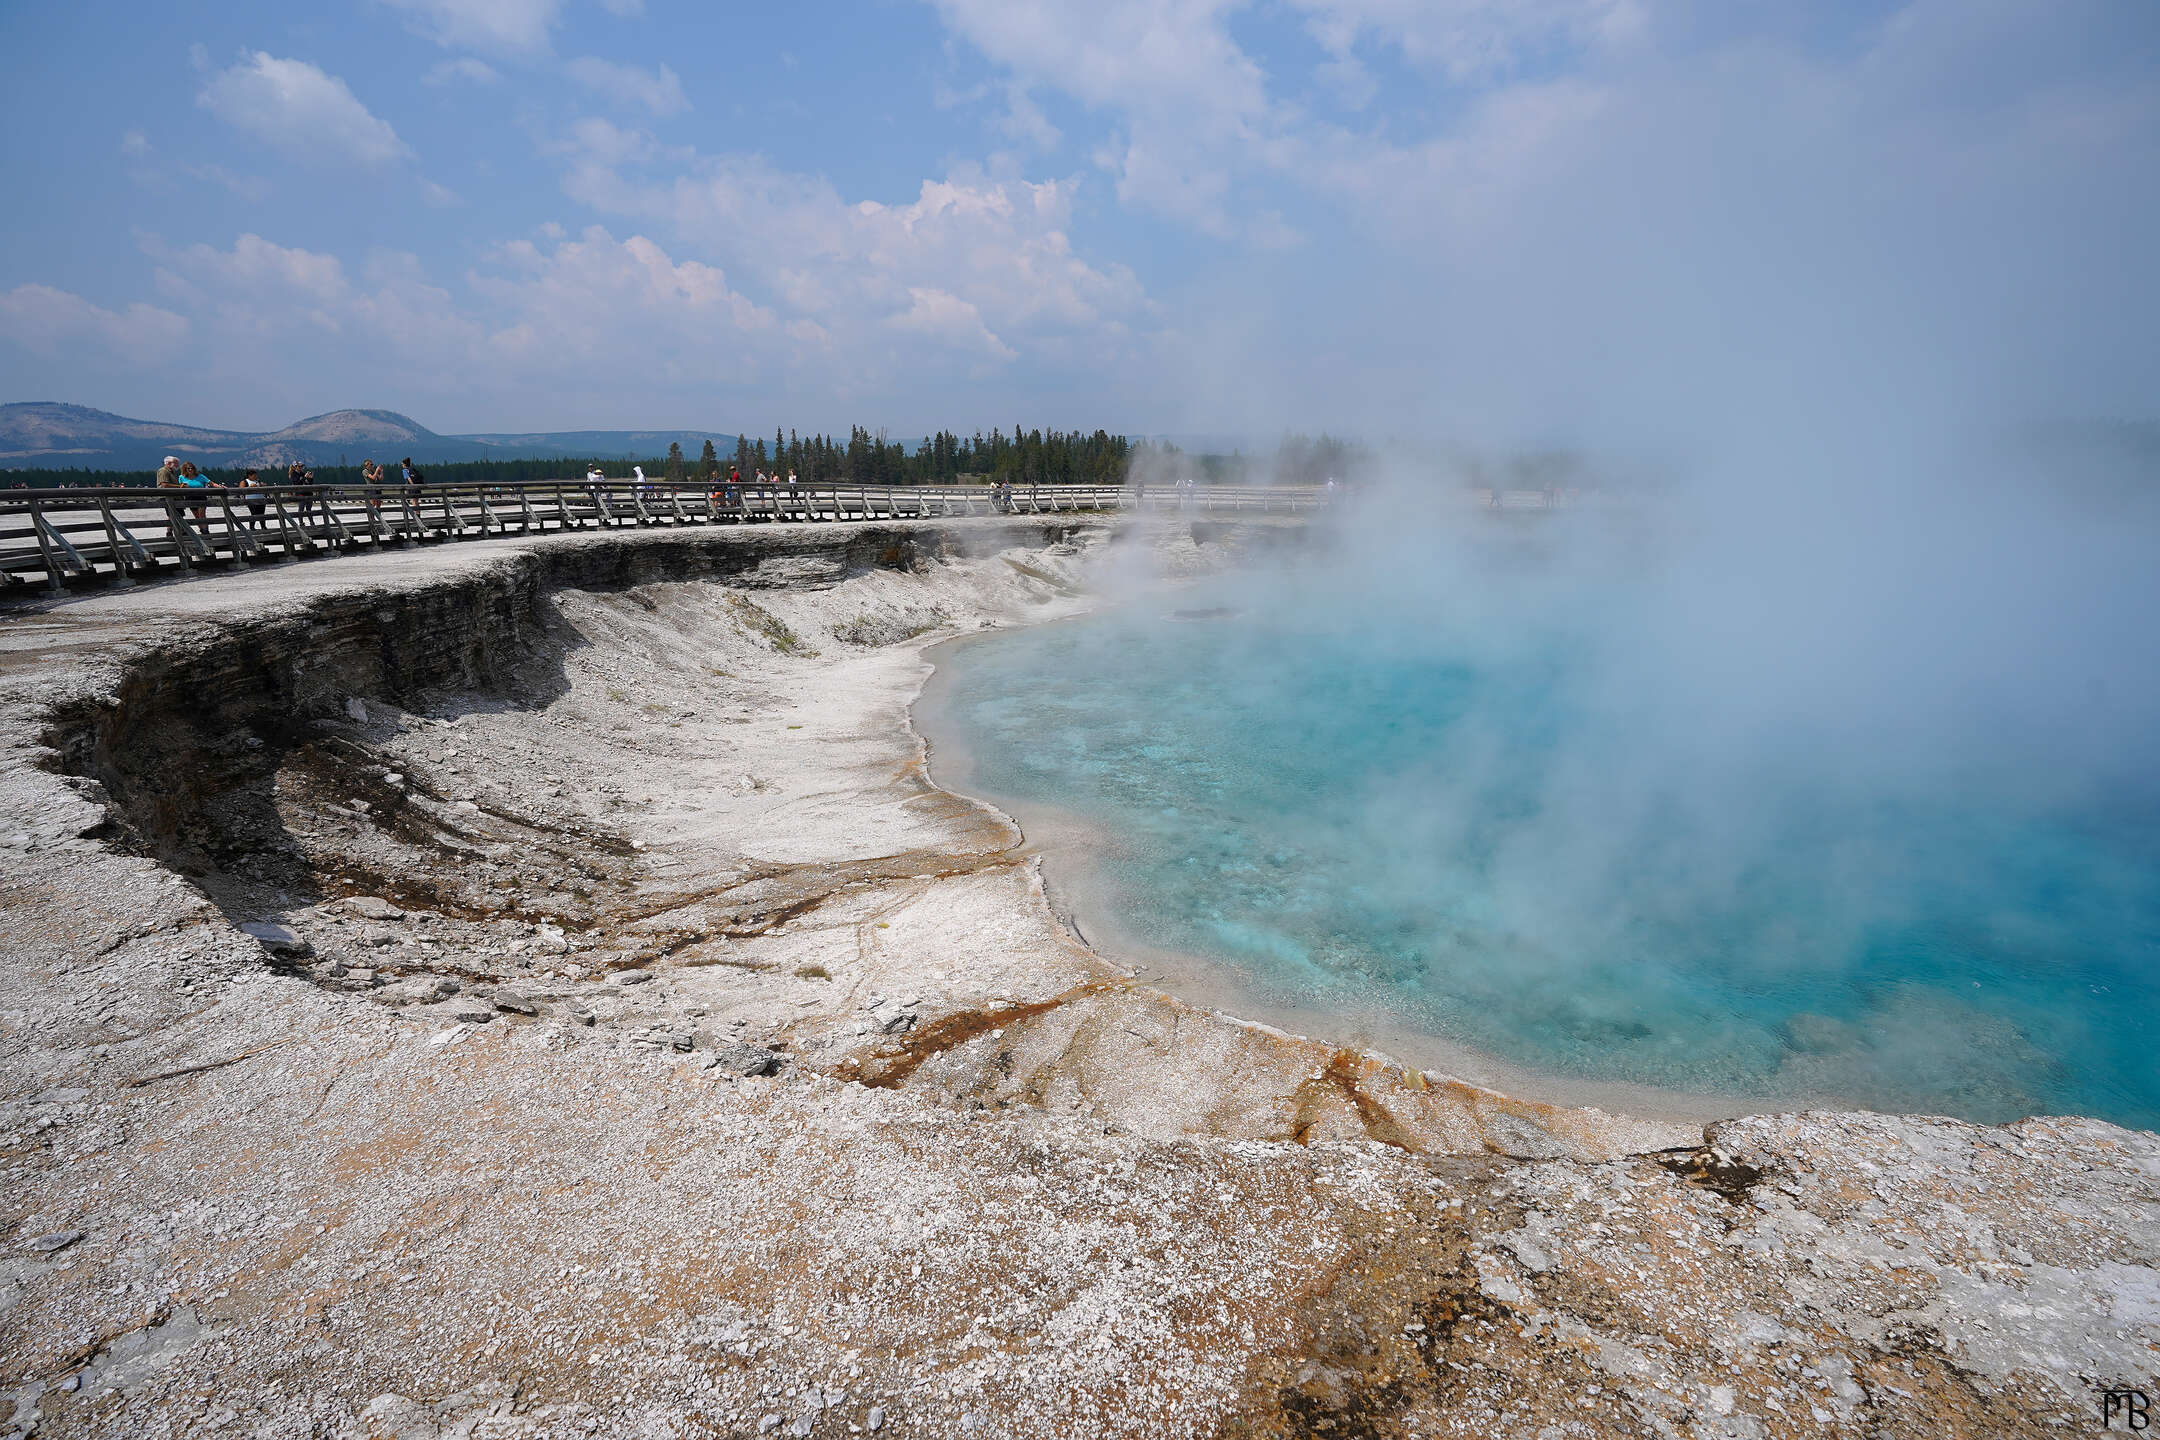 A very large and blue hot spring